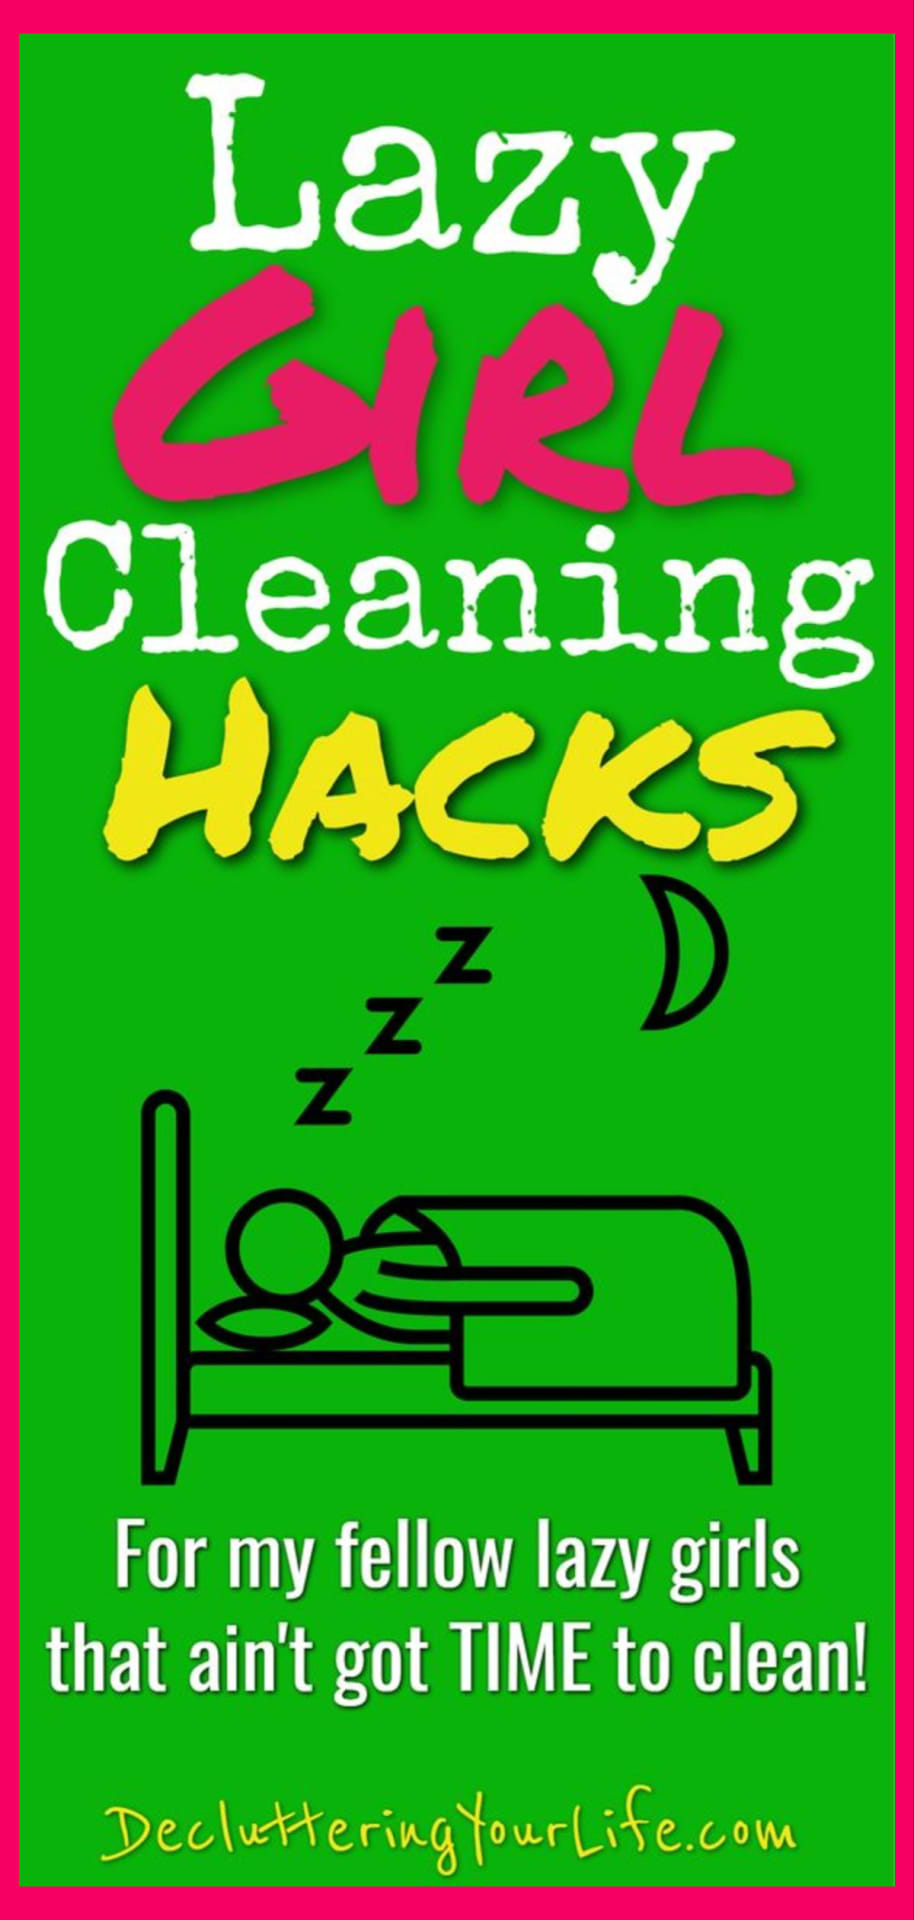 Lazy Girl Cleaning Hacks – Simple Cleaning Tips for Lazy People (lazy moms too) - Lazy cleaning hacks, lazy cleaning schedule, lazy cleaning routine and more SIMPLE lazy cleaning hacks & tips and housekeeping cleaning hacks tips and tricks everyone should know. Life changing helpful hints for how to clean when your house is a mess and you don't WANT to clean.